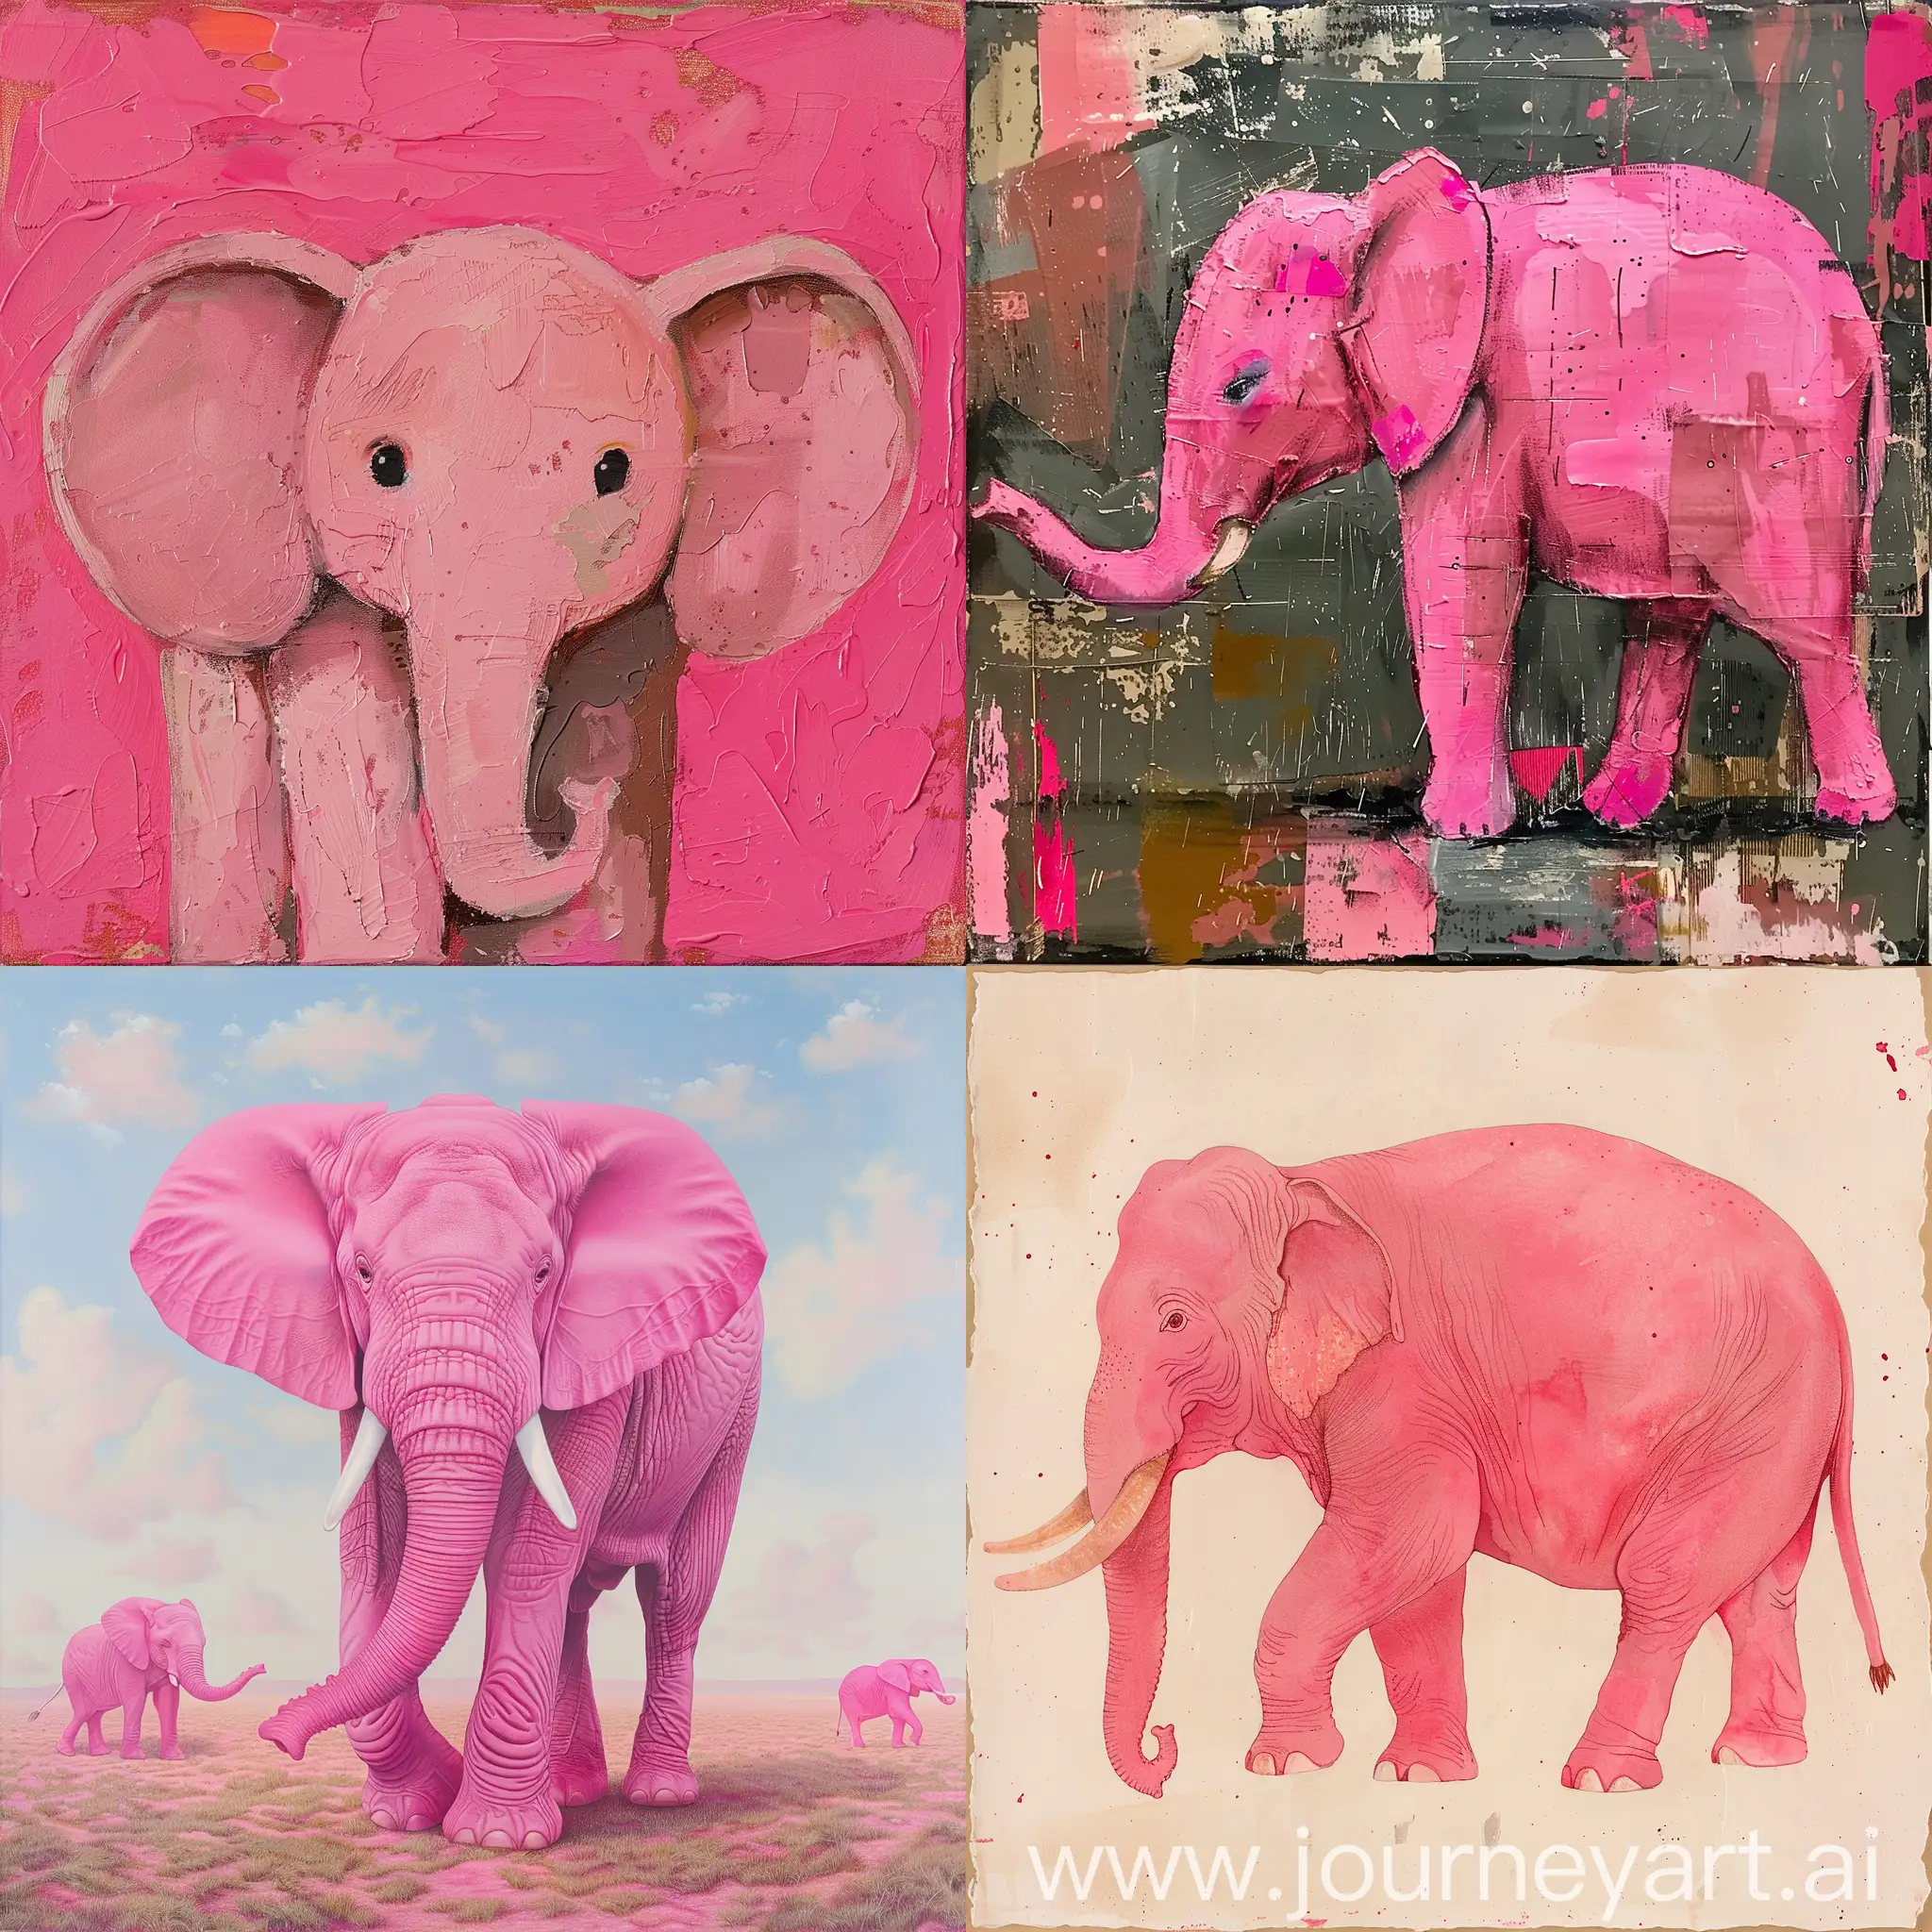 Playful-Pink-Elephant-in-a-Vibrant-Abstract-Landscape